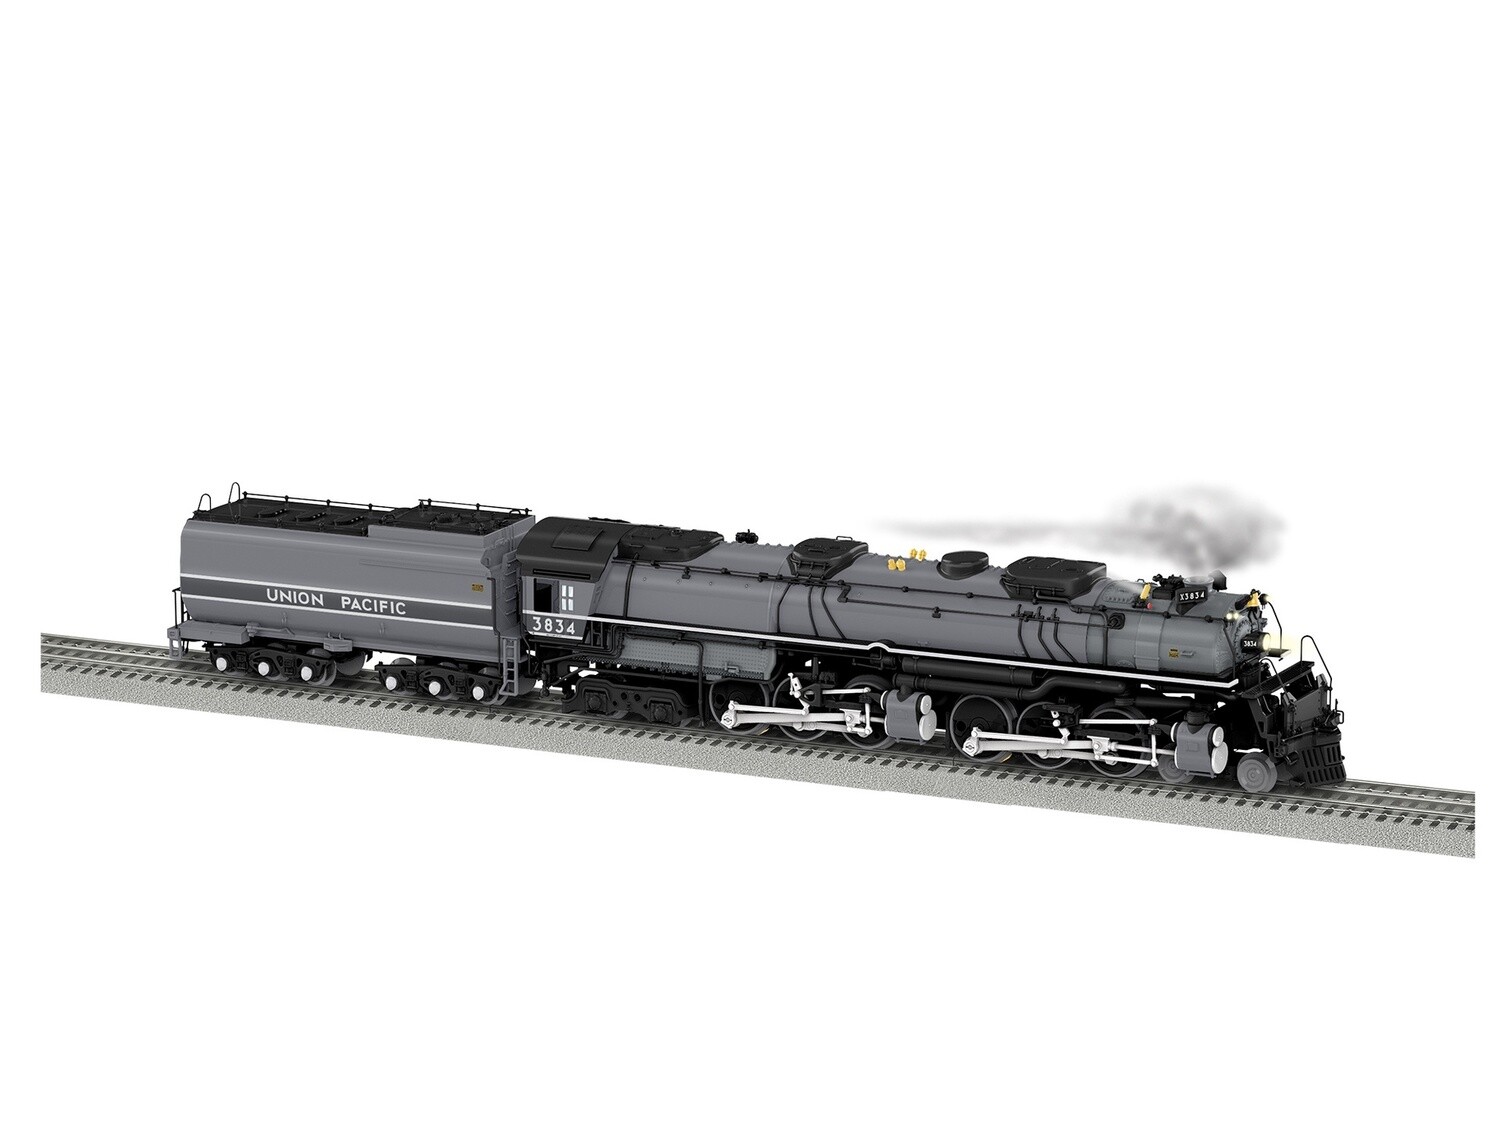 UNION PACIFIC LEGACY CHALLENGER #3834 "GREYHOUND"